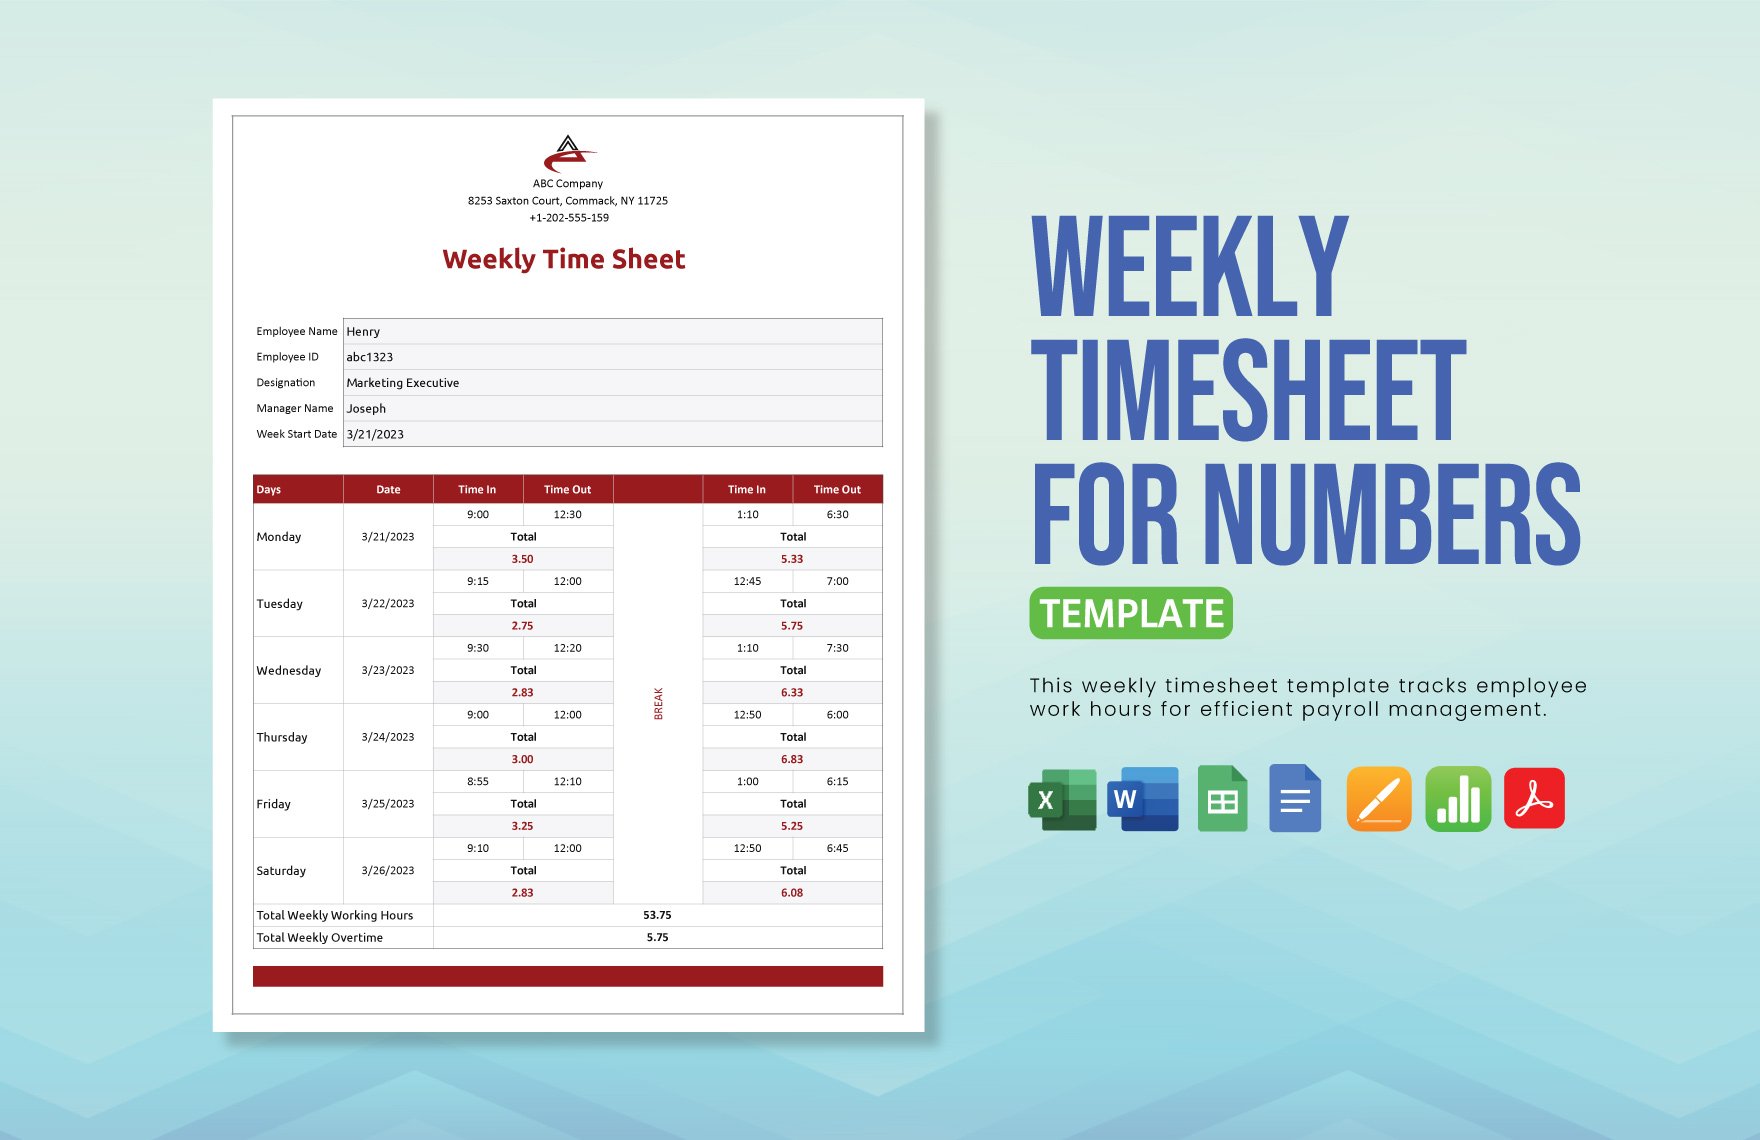 Weekly Timesheet Template For Numbers in Word, Google Docs, Excel, PDF, Google Sheets, Apple Pages, Apple Numbers